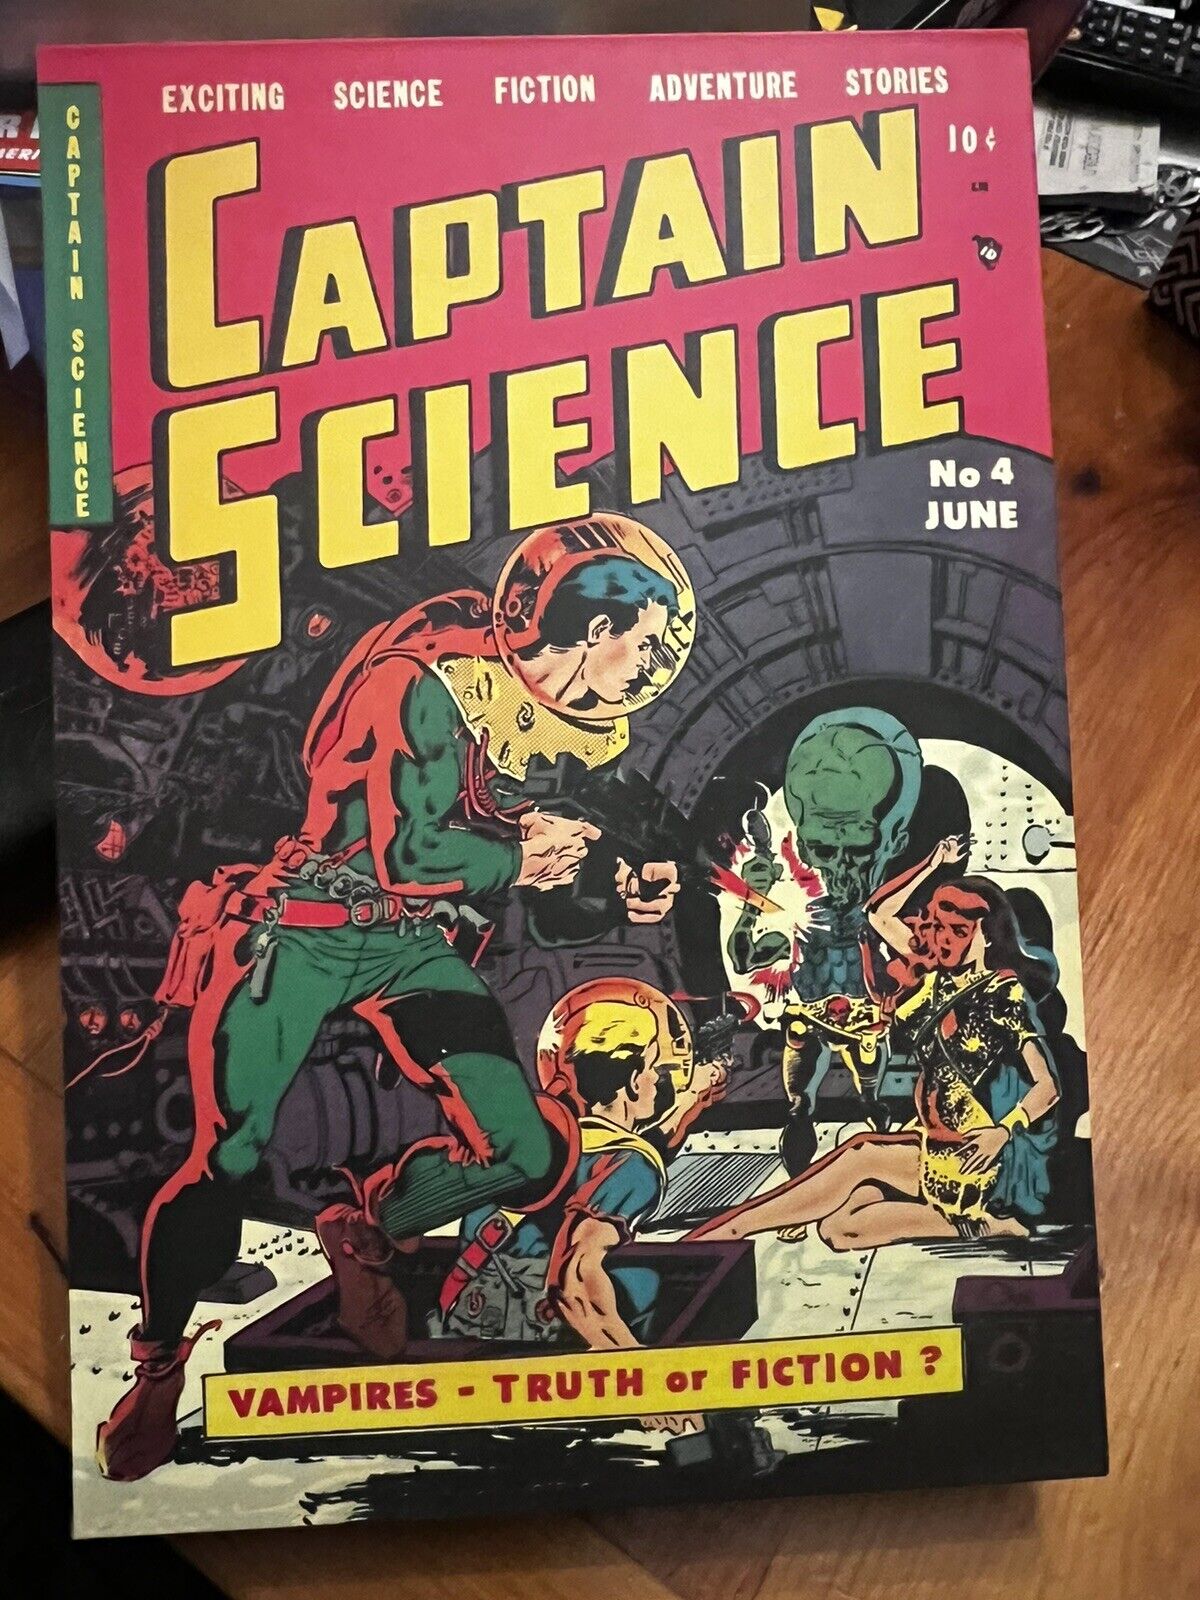 Captain Science Nov 1954 to July 1955 issues 1-7 vampires - HC - Sleeve 1st Edit